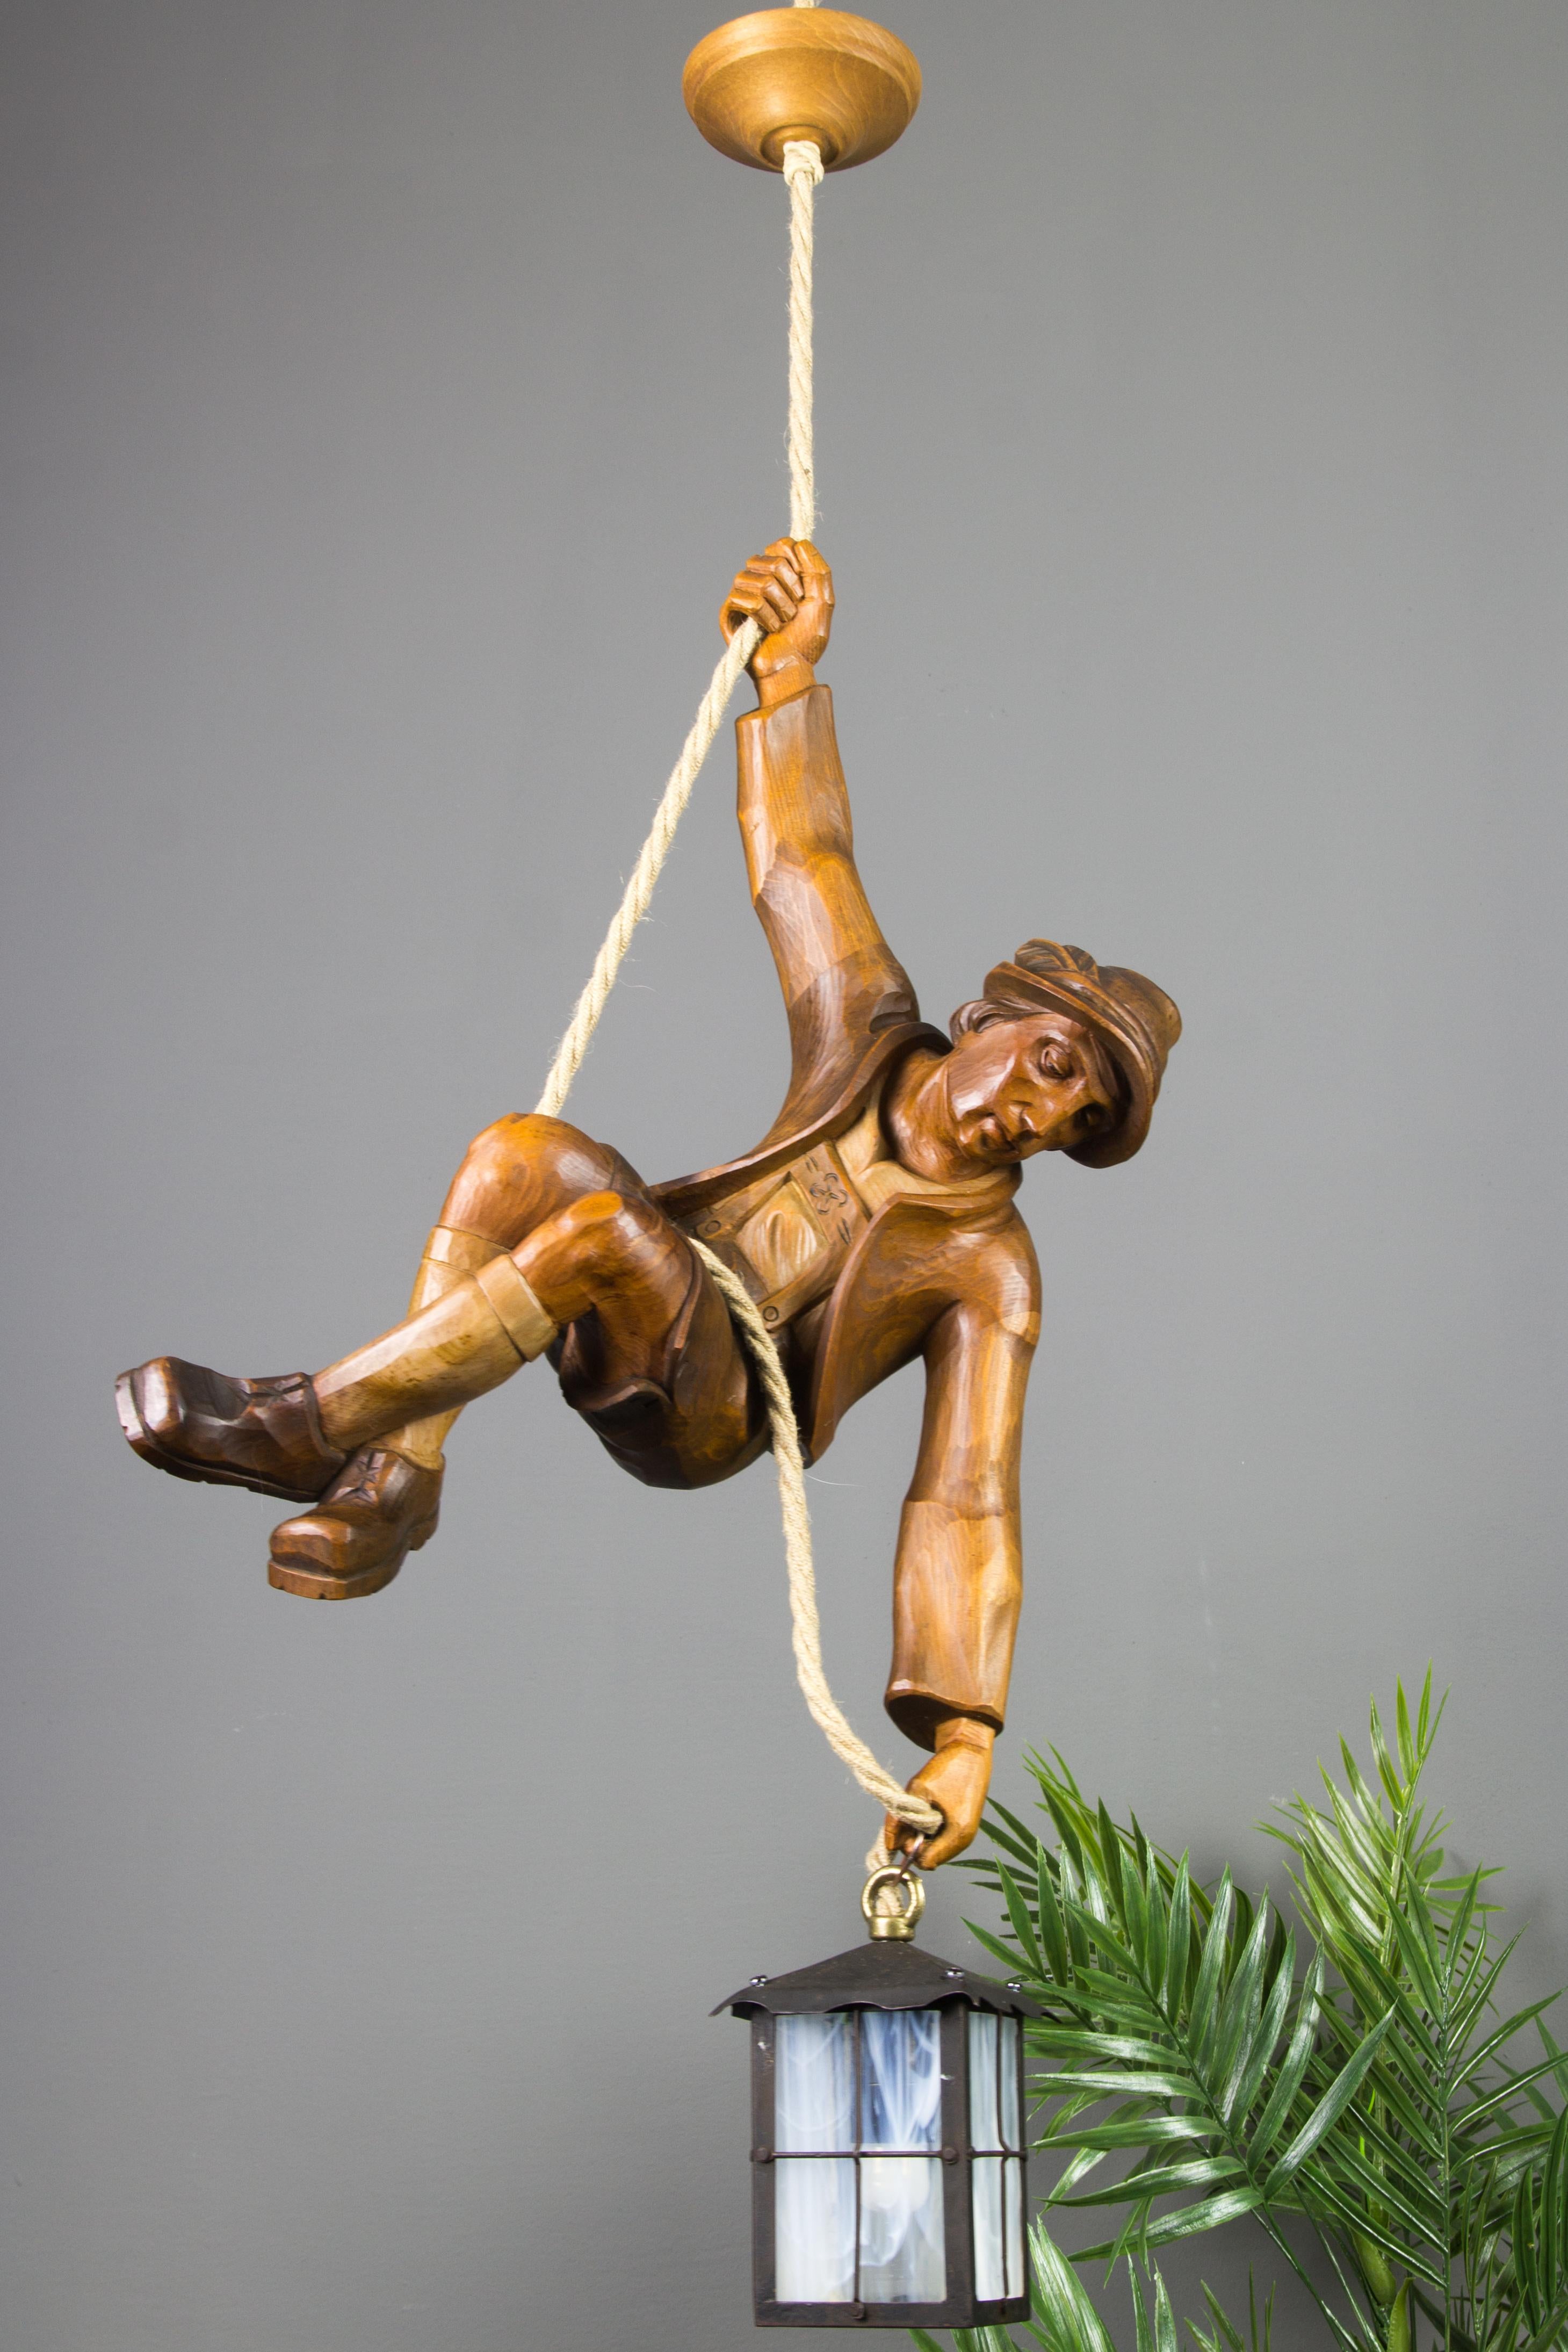 Black Forest Figural Pendant Light of a Hand Carved Wood Figure Mountain Climber with Lantern